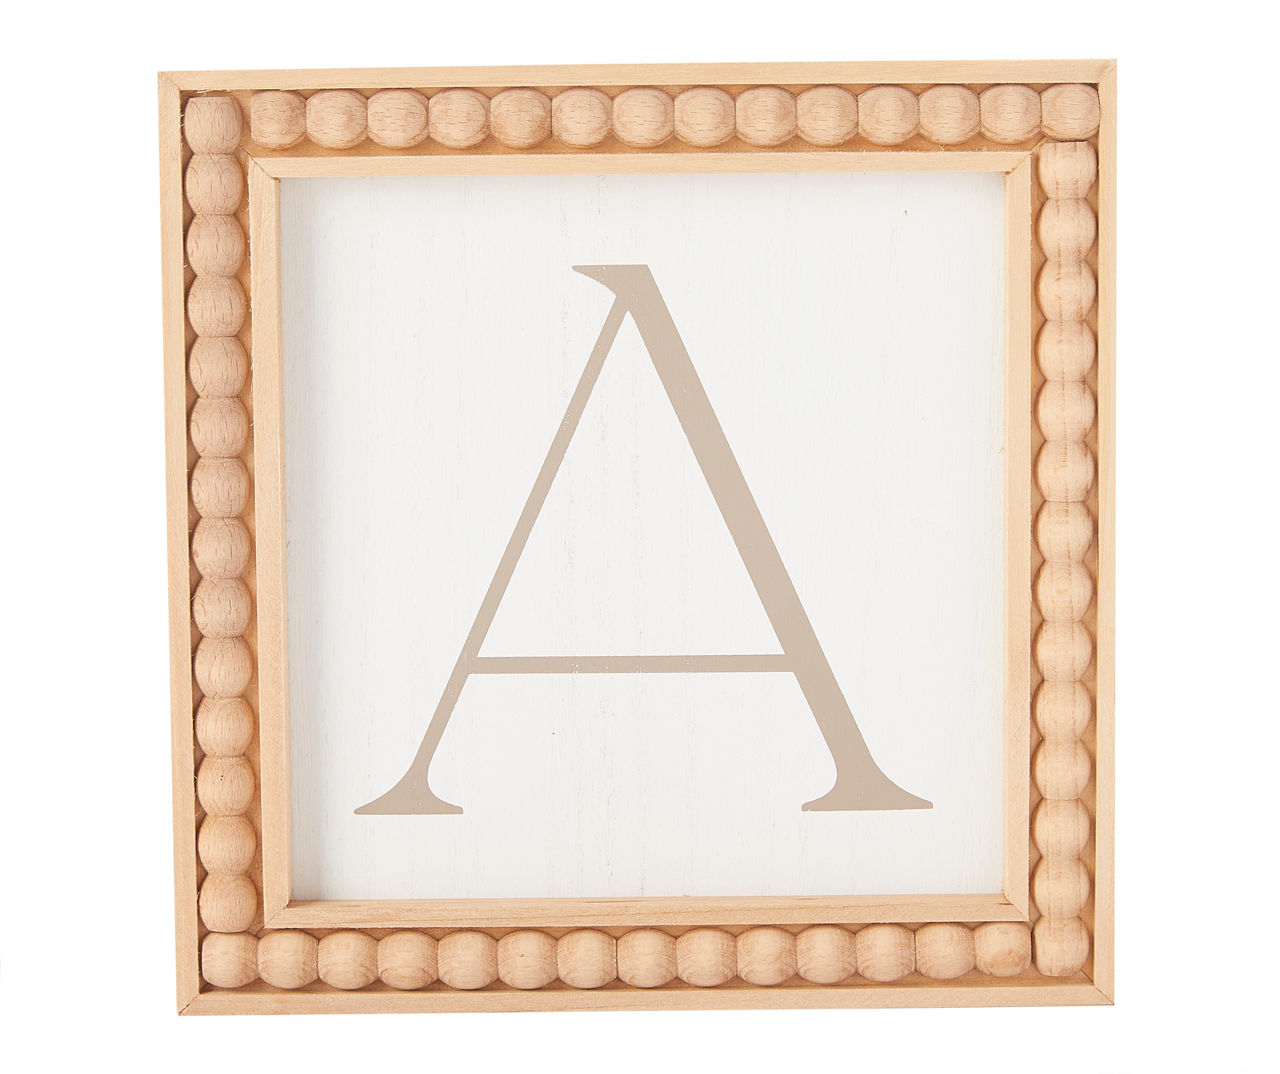 "A" Brown & White Wood Bead Framed Wall Plaque 